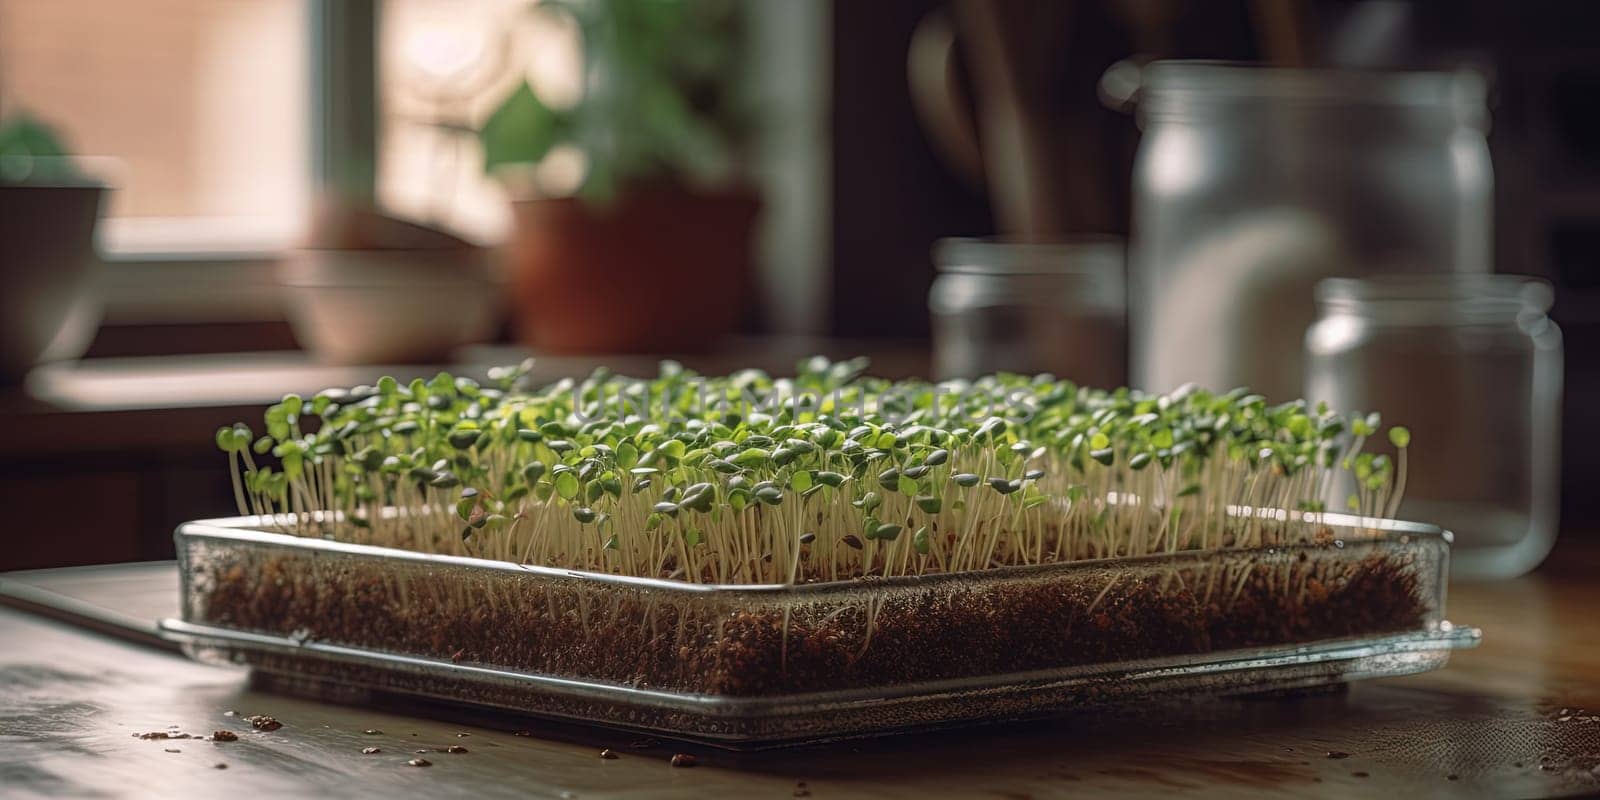 Growing micro green sprouts in container by tan4ikk1